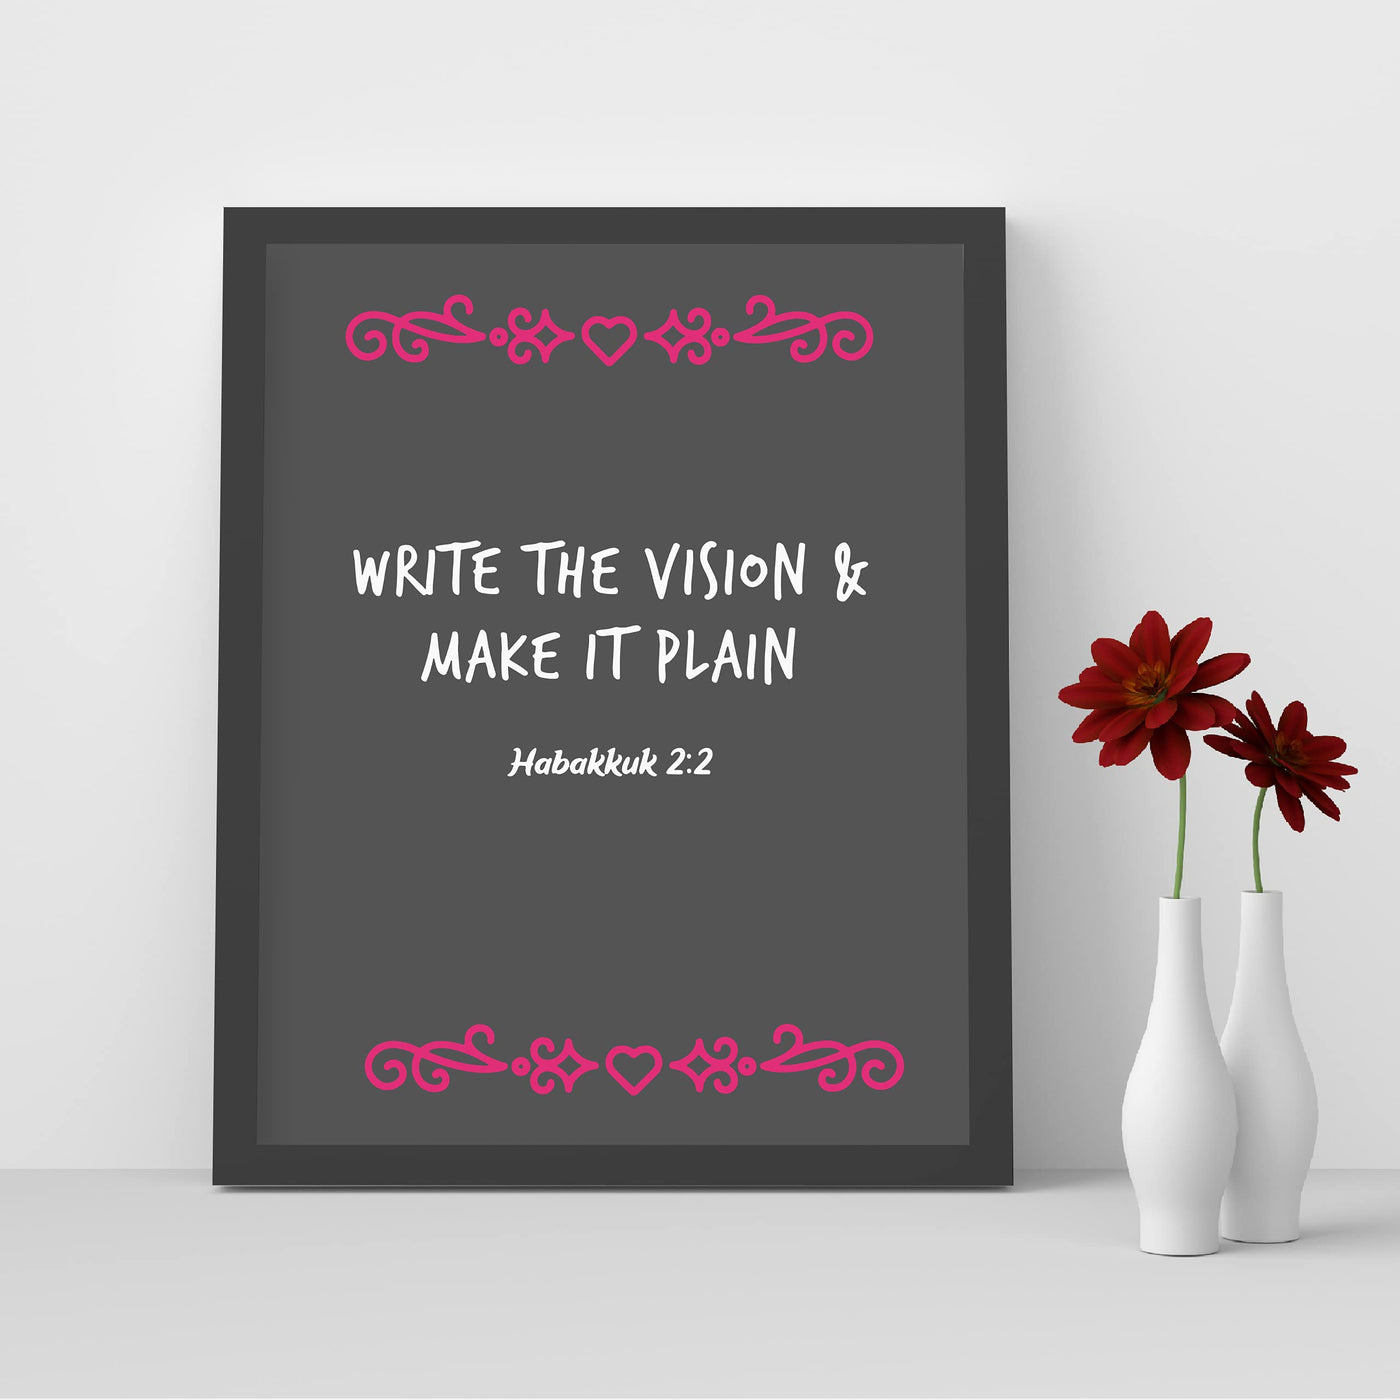 Write the Vision & Make It Plain-Habakkuk 2:2 -Bible Verse Wall Art-8 x 10" Inspirational Christian Print -Ready to Frame. Modern Scripture Print for Home-Office-Church Decor. Great Religious Gift!